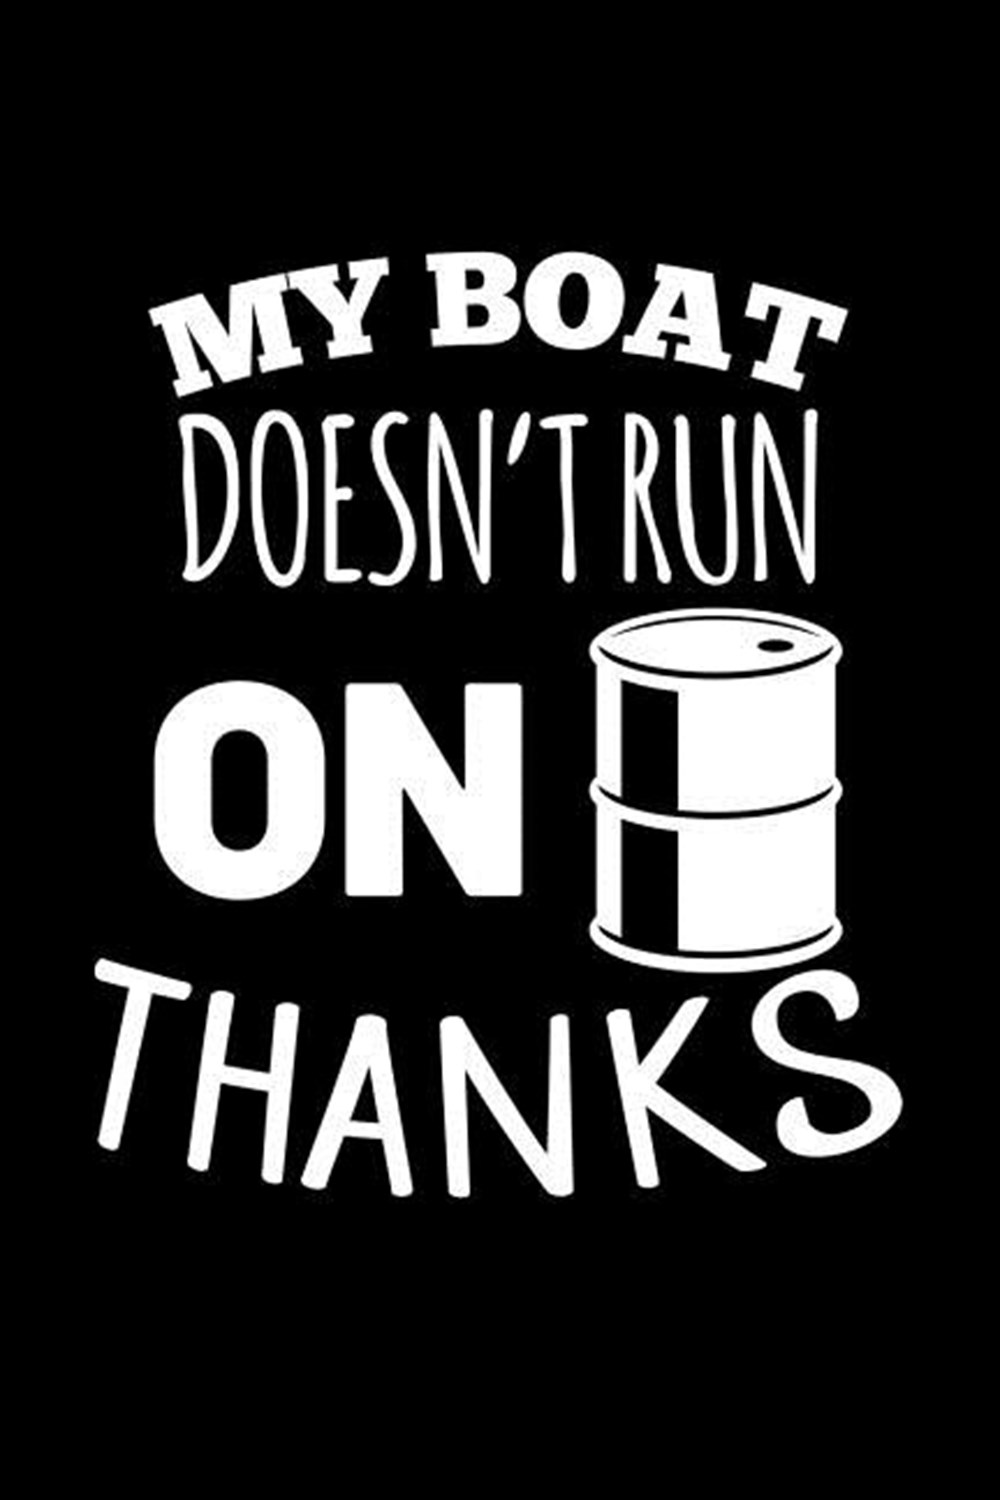 My Boat Doesn't Run On Thanks Blank Paper Sketch Book - Artist Sketch Pad Journal for Sketching, Doo